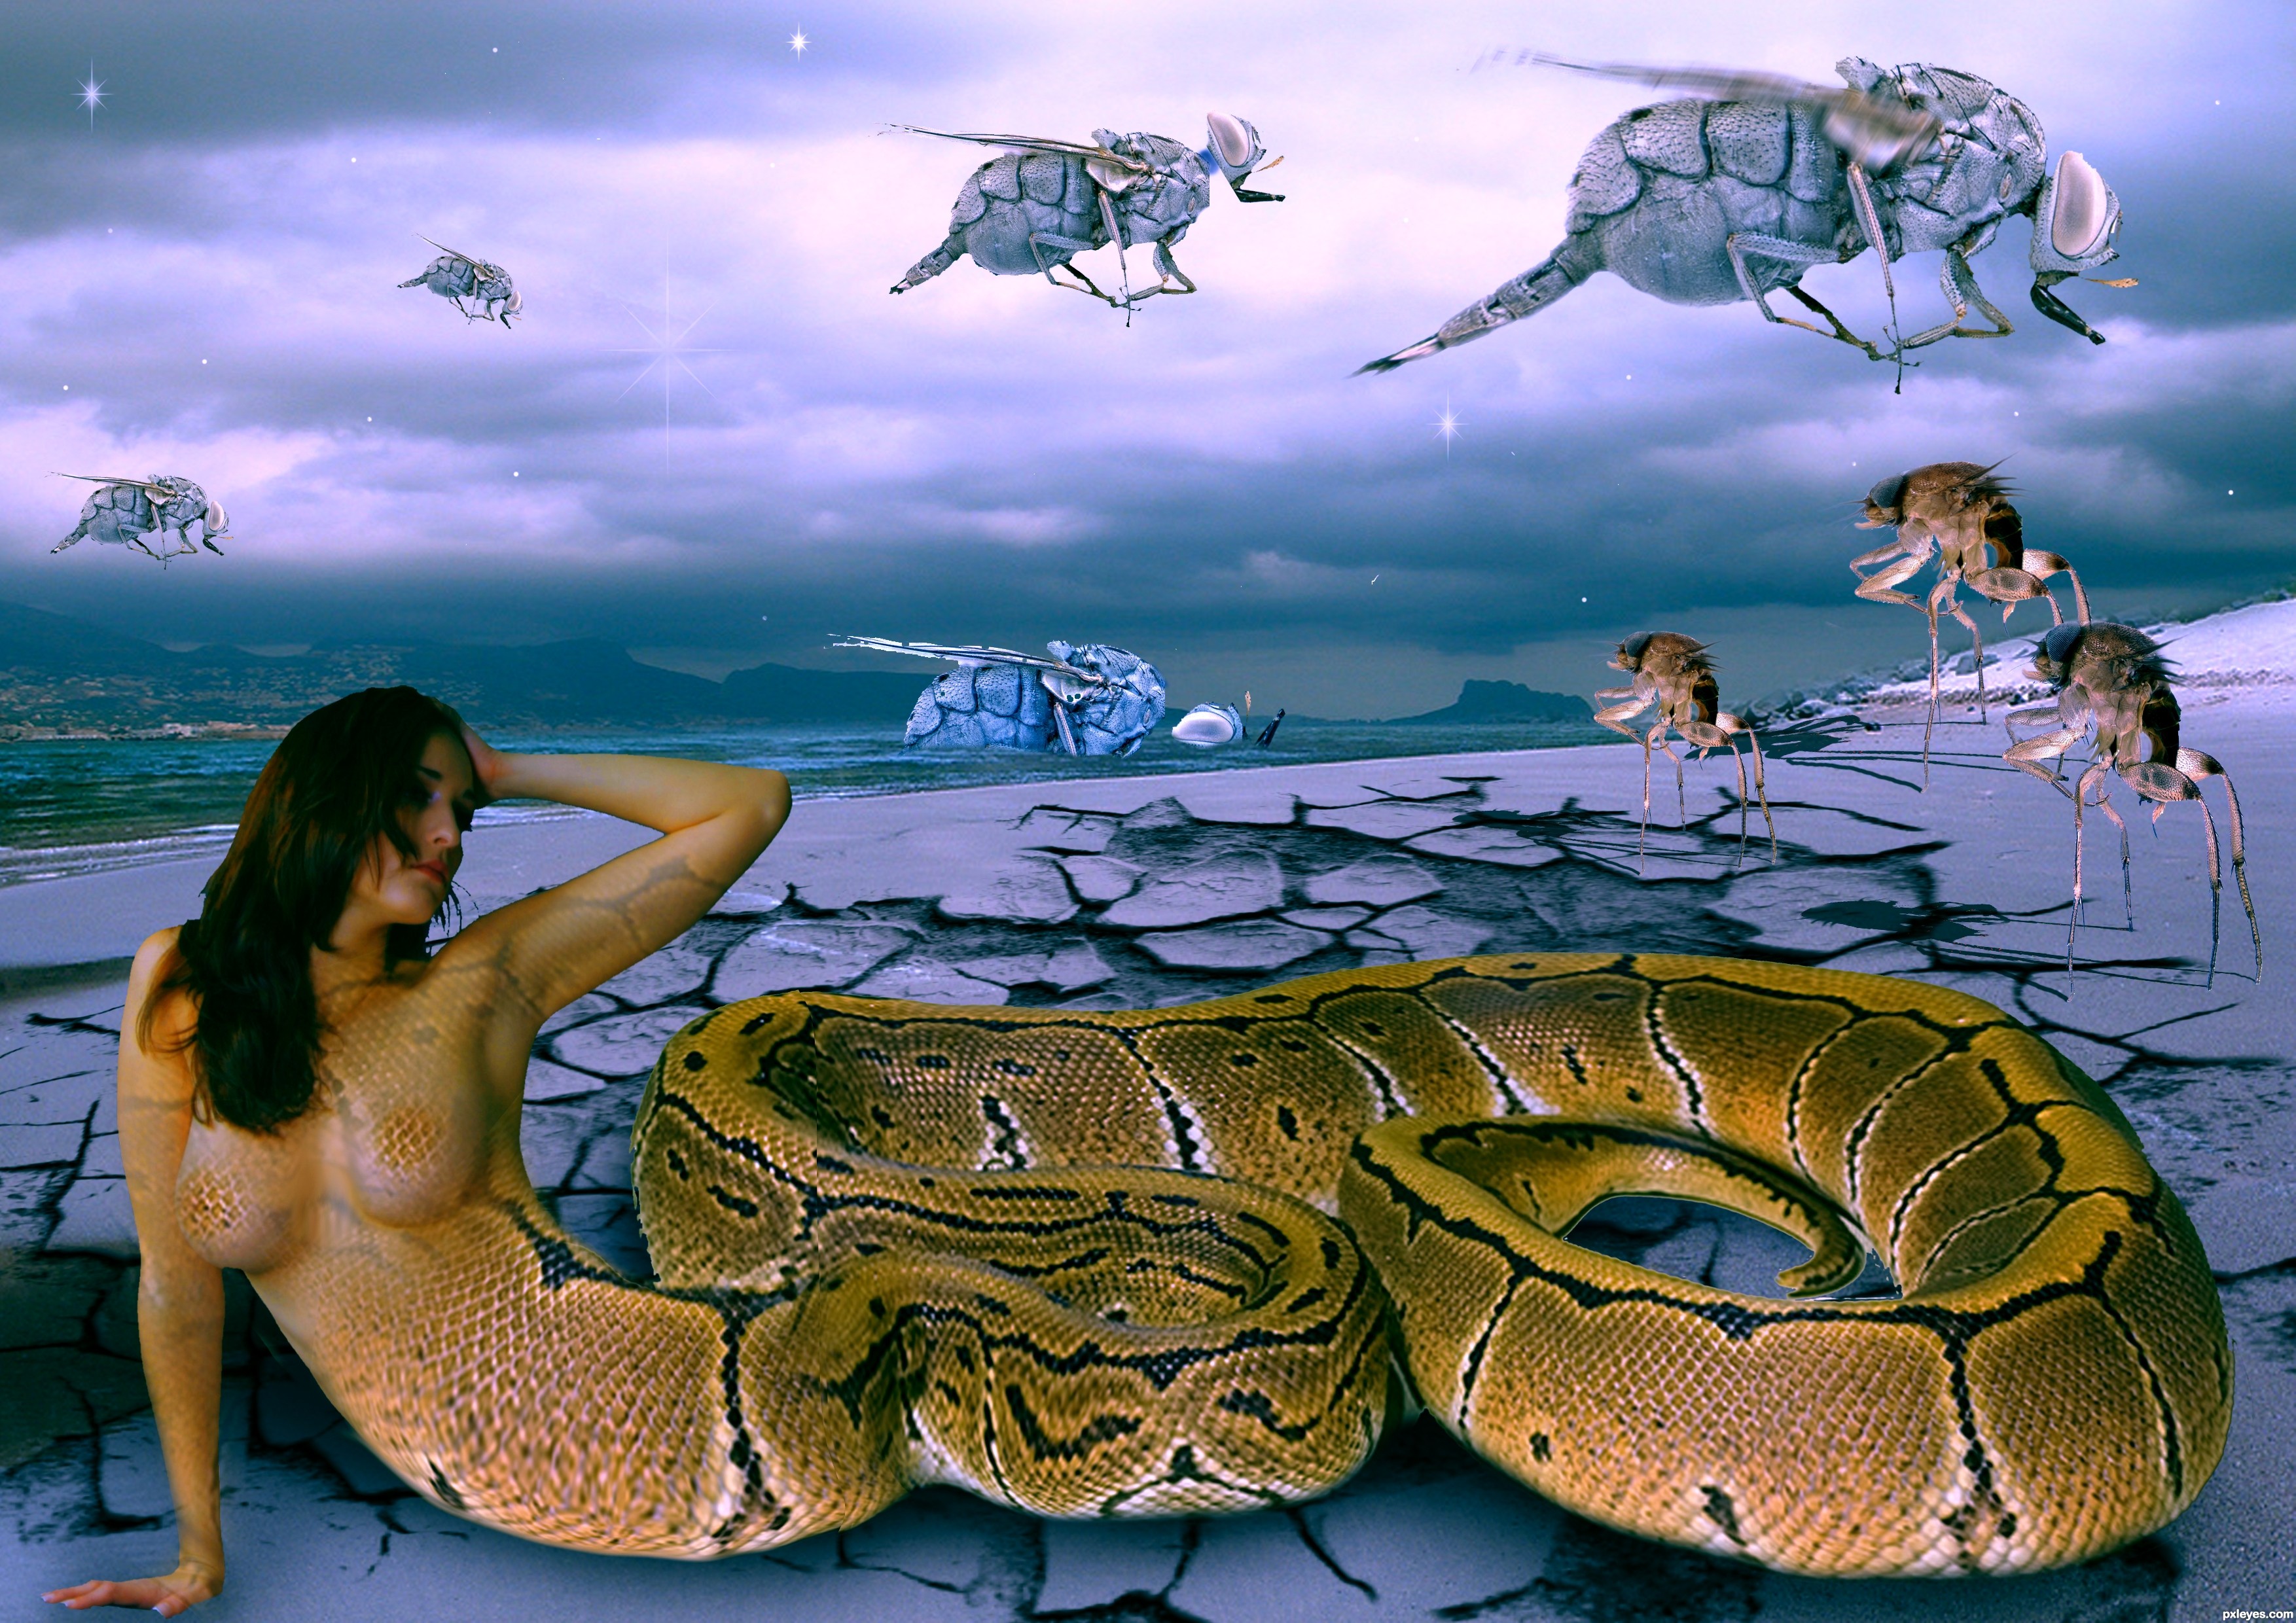 the other world picture, by jack2 for: mixed media 25 photoshop ...